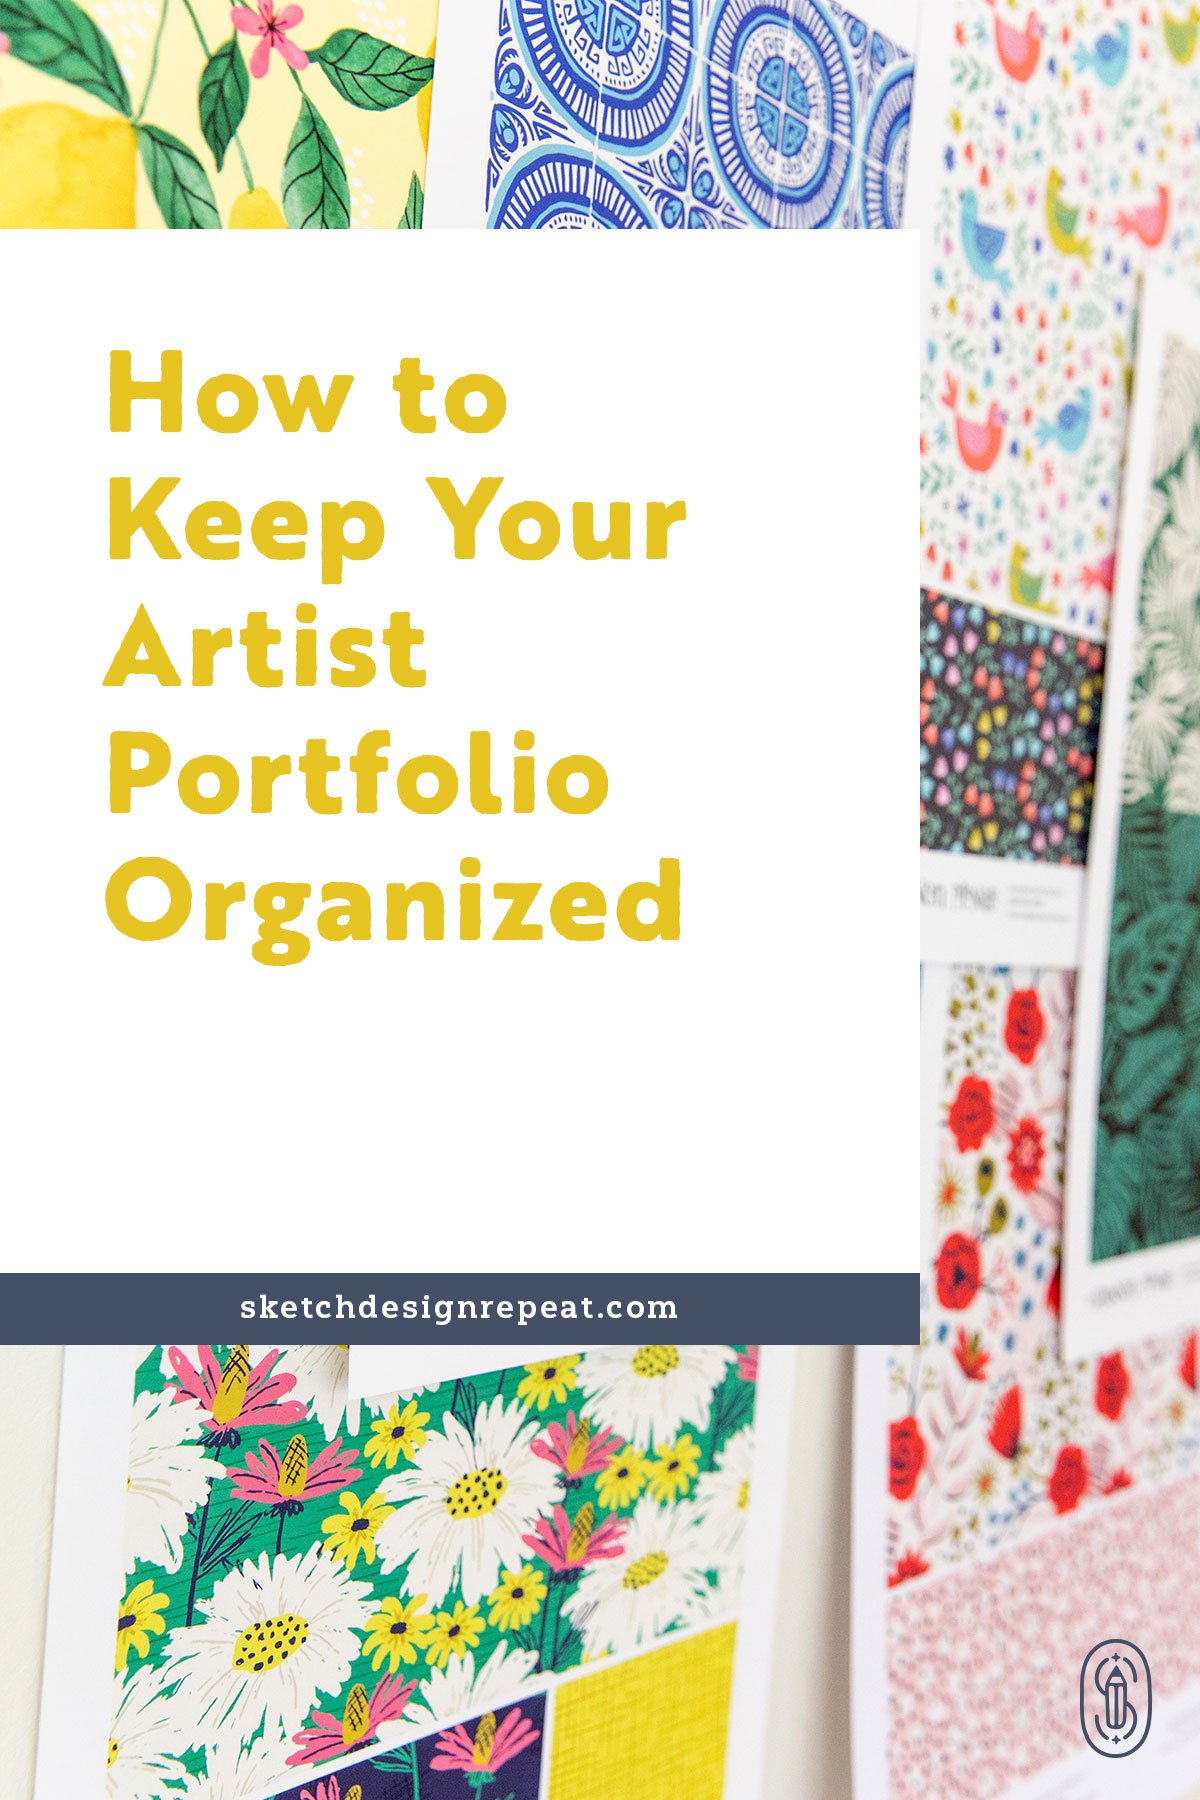 What to include in your artist portfolio